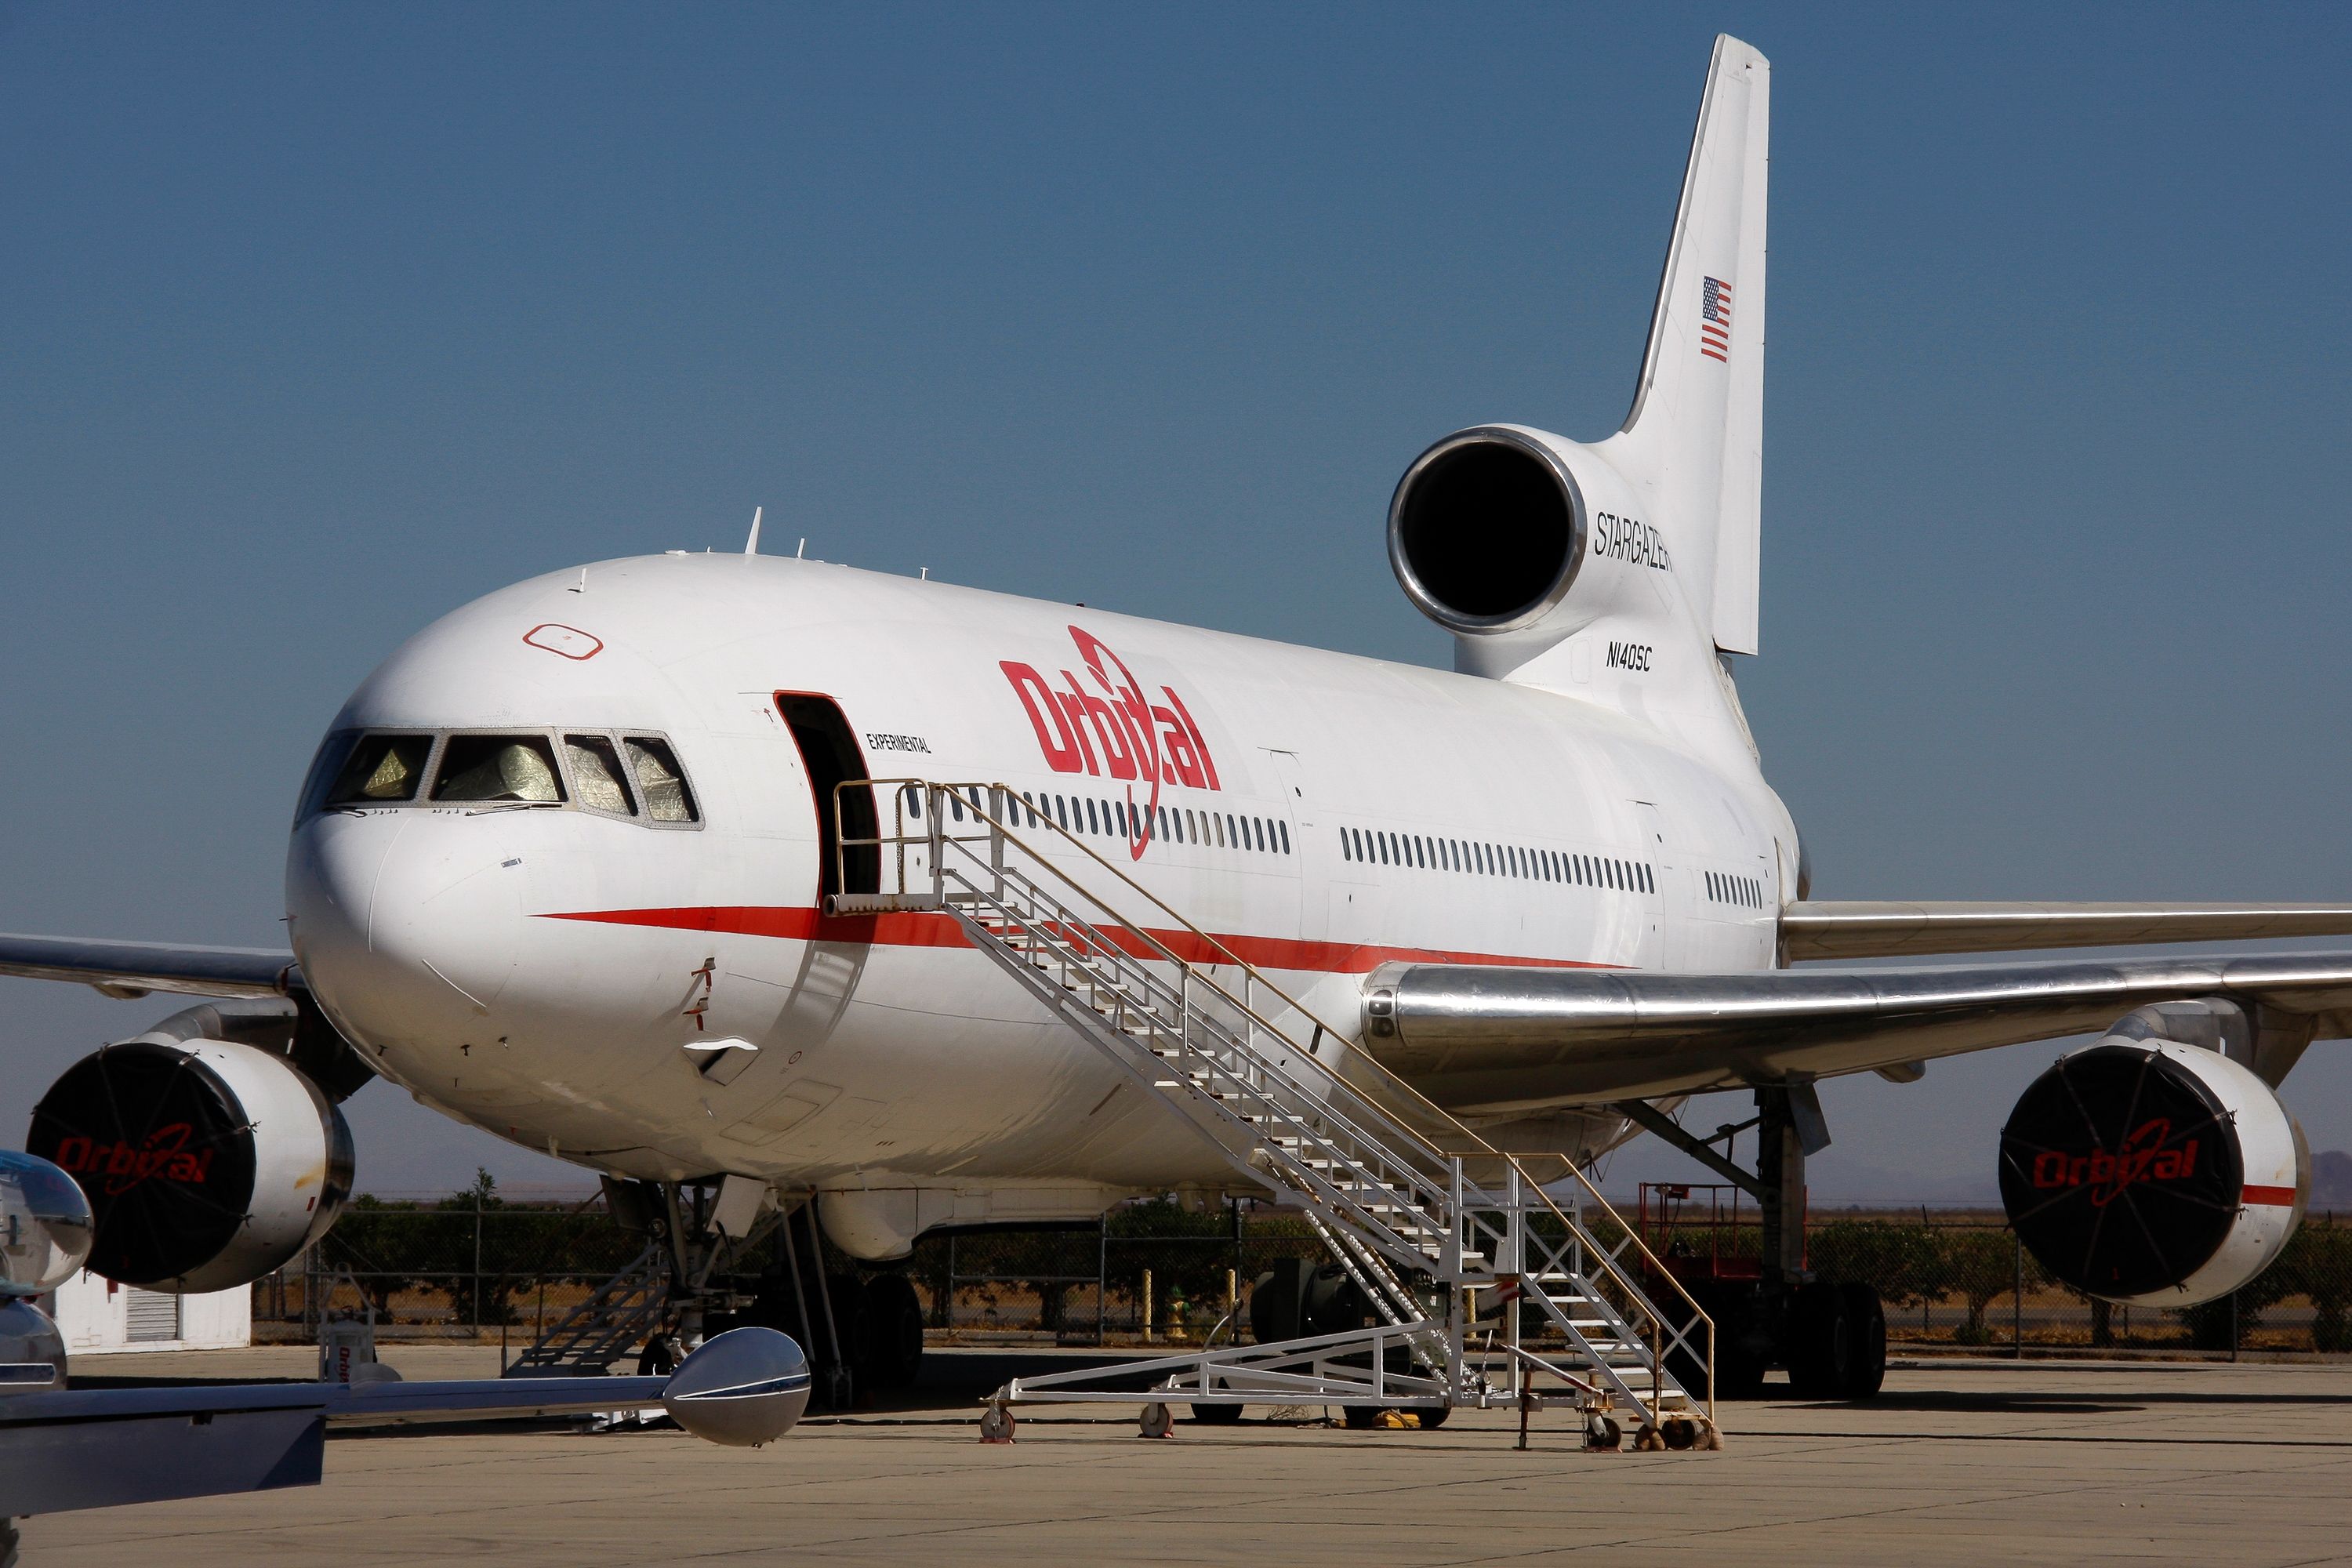 The Lockheed L-1011 Tristar satellite launch platform of Orbital Science parked on the ramp at Mojave airport in California.